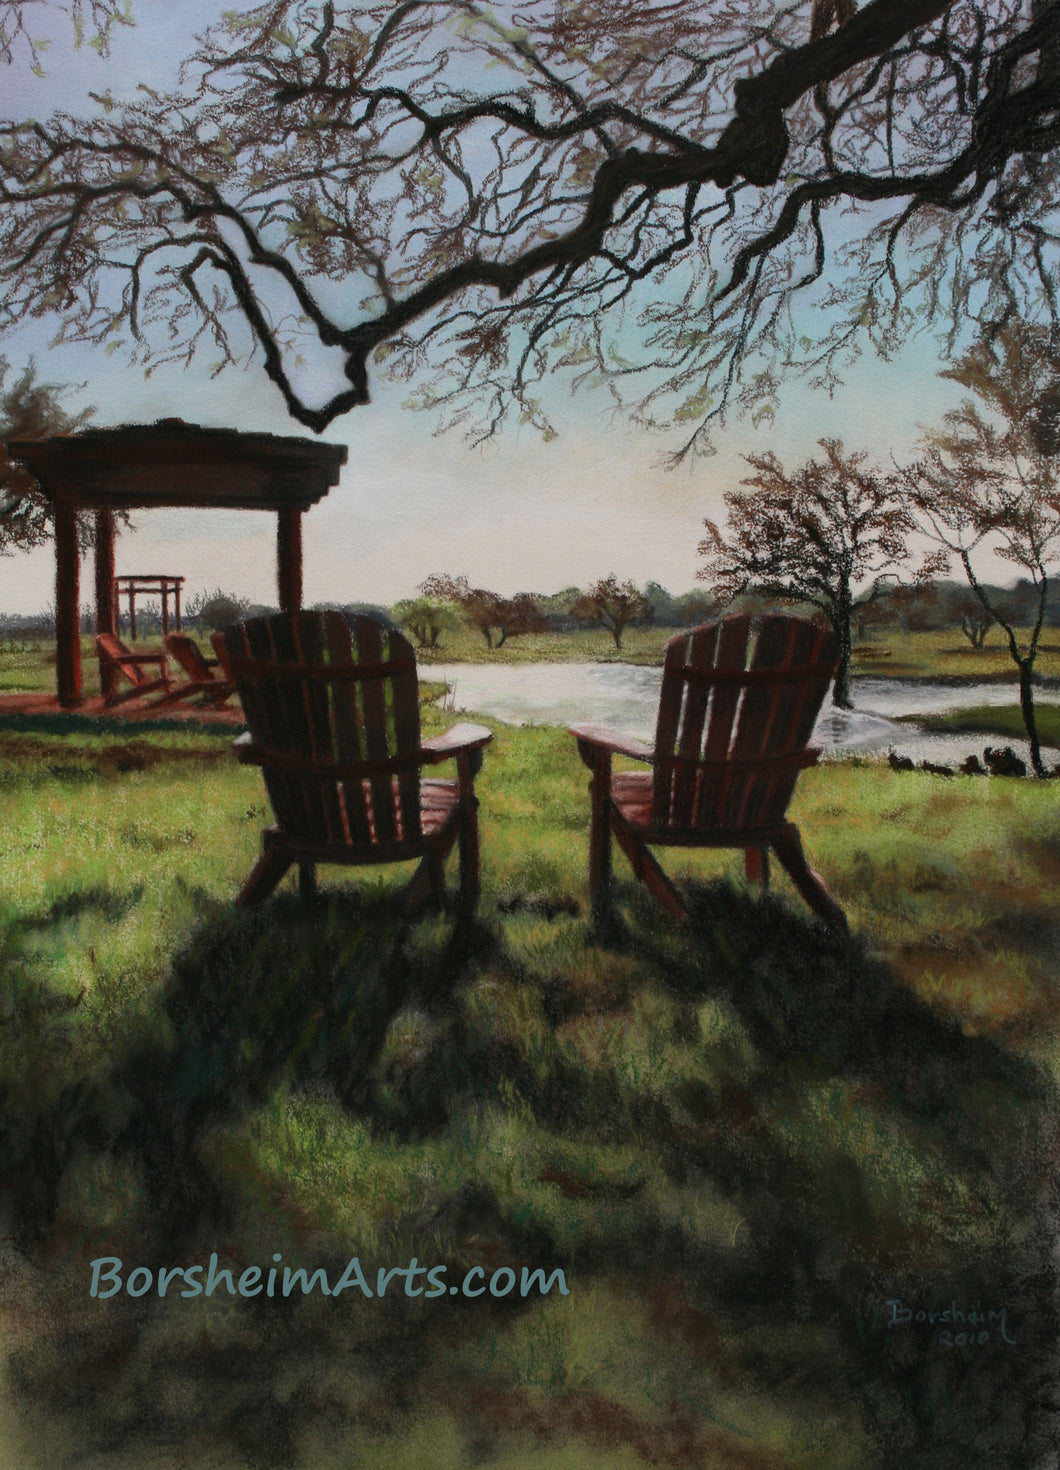 Morning Light at the Vineyard - Florence, Texas Sun Chairs Relax Lake View - ORIGINAL Pastel Painting